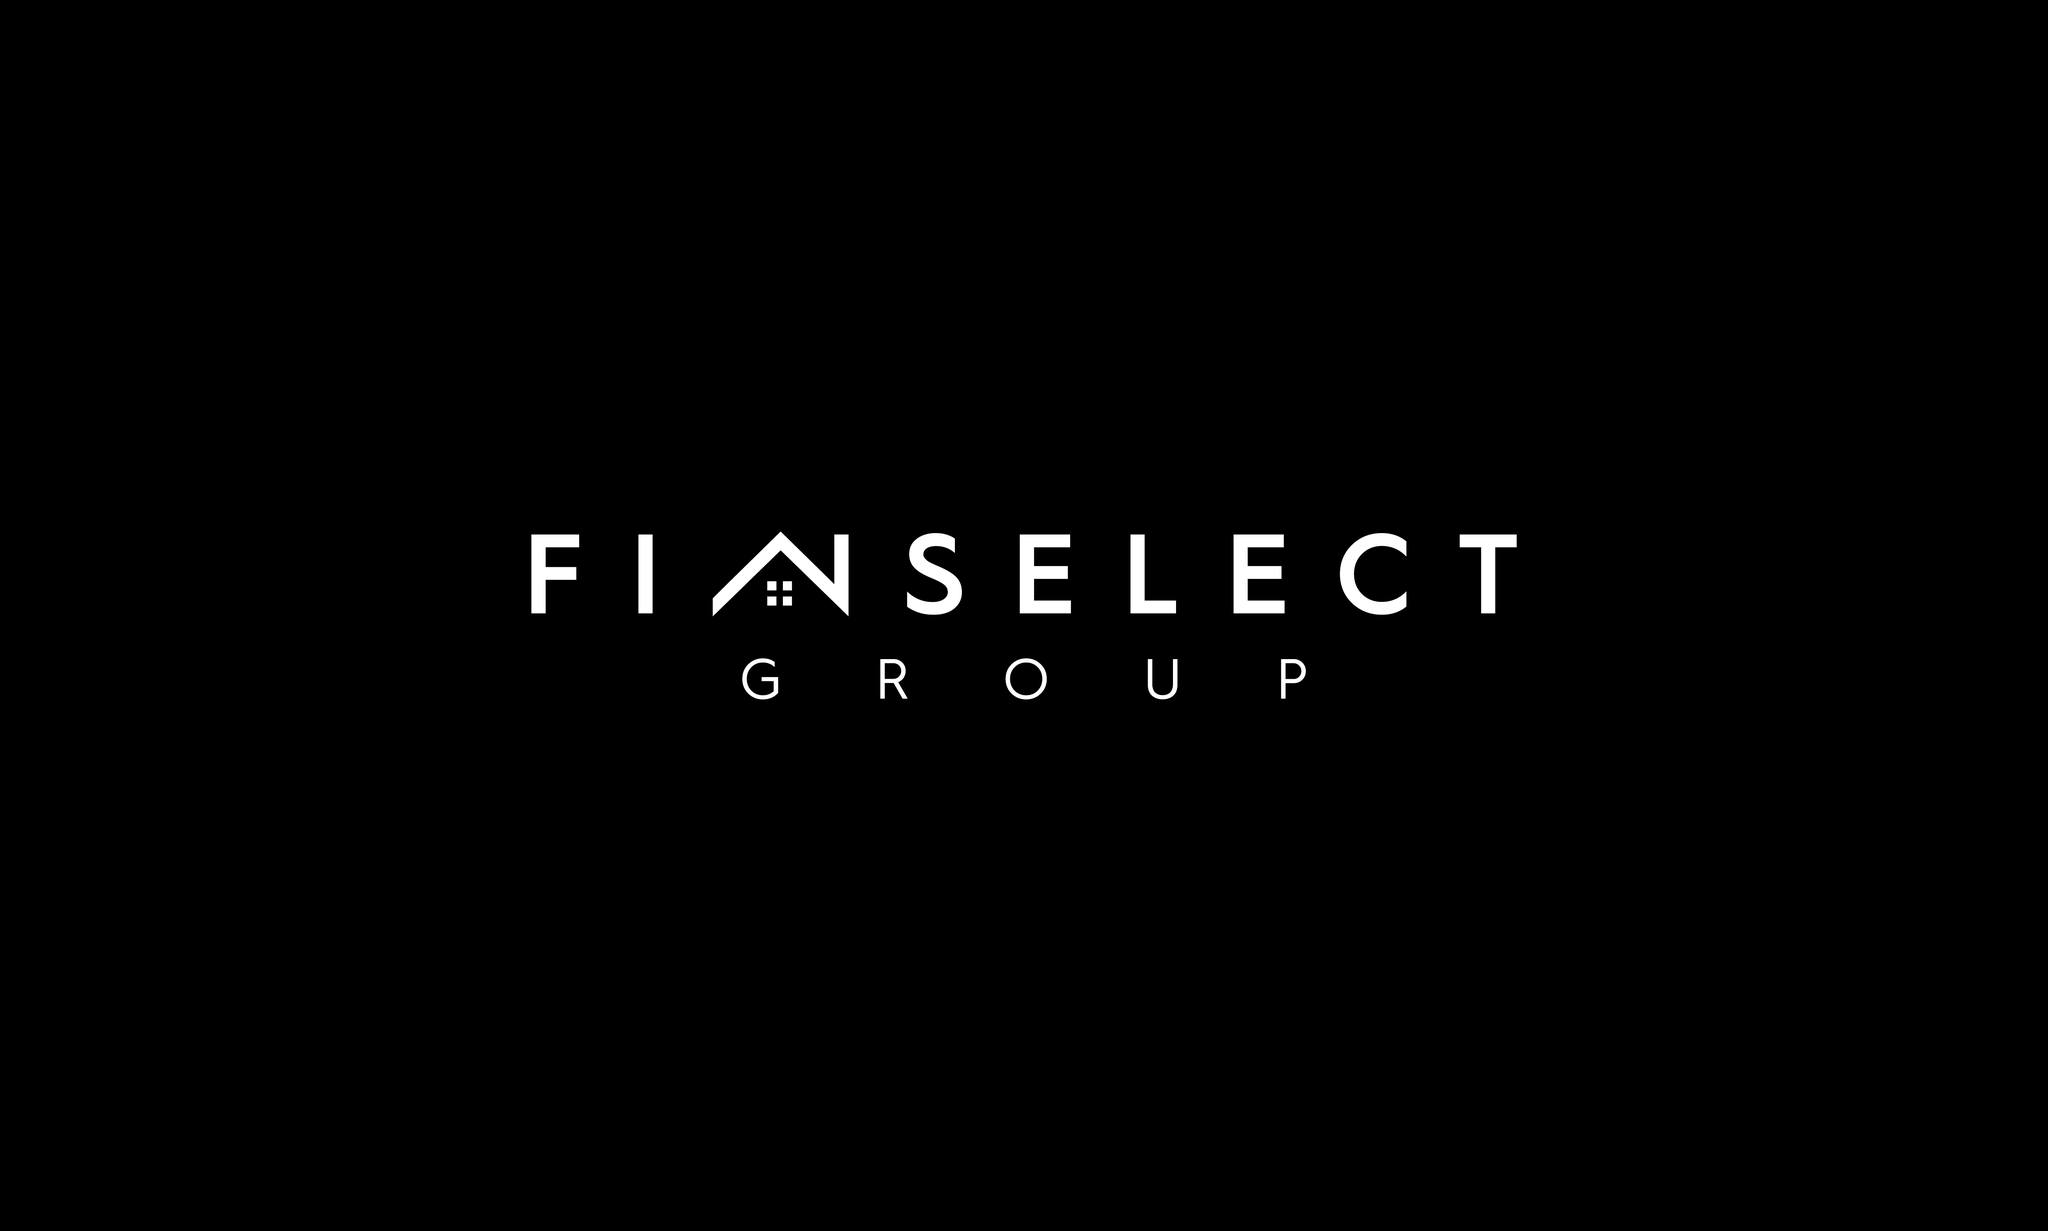 Finselect Group